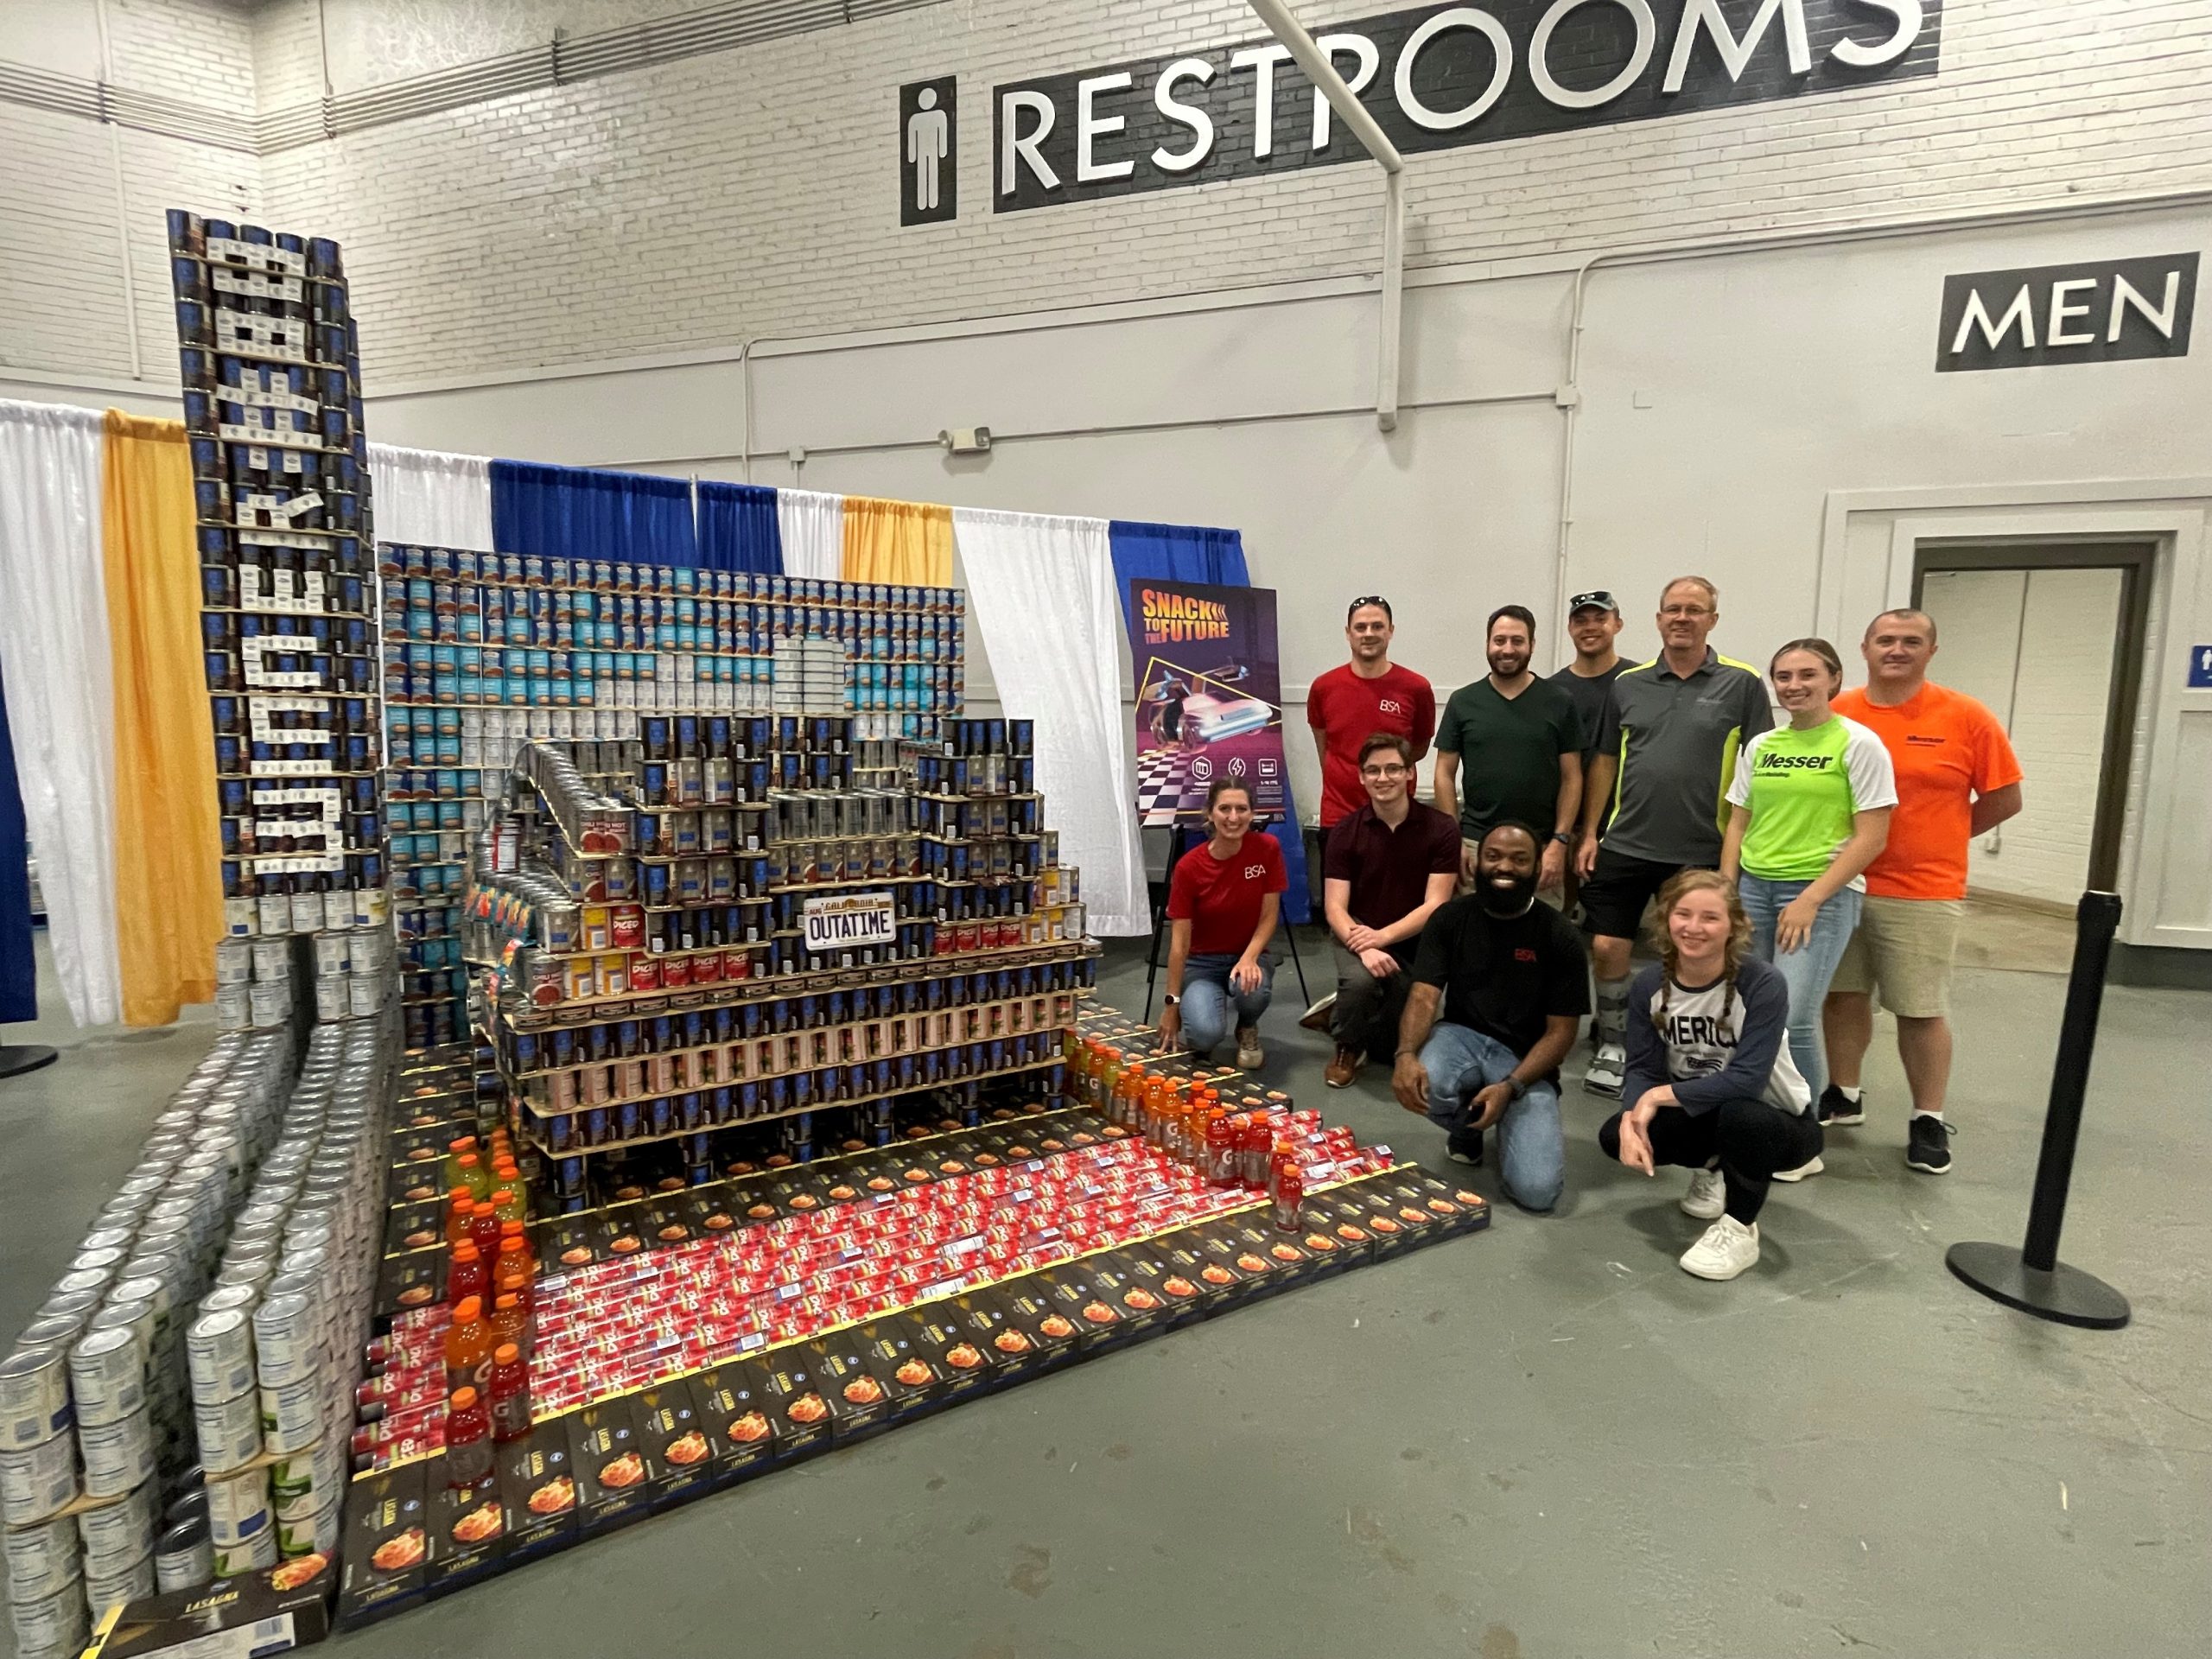 Messer Construction Co employees posing in front of a structure made out of canned goods